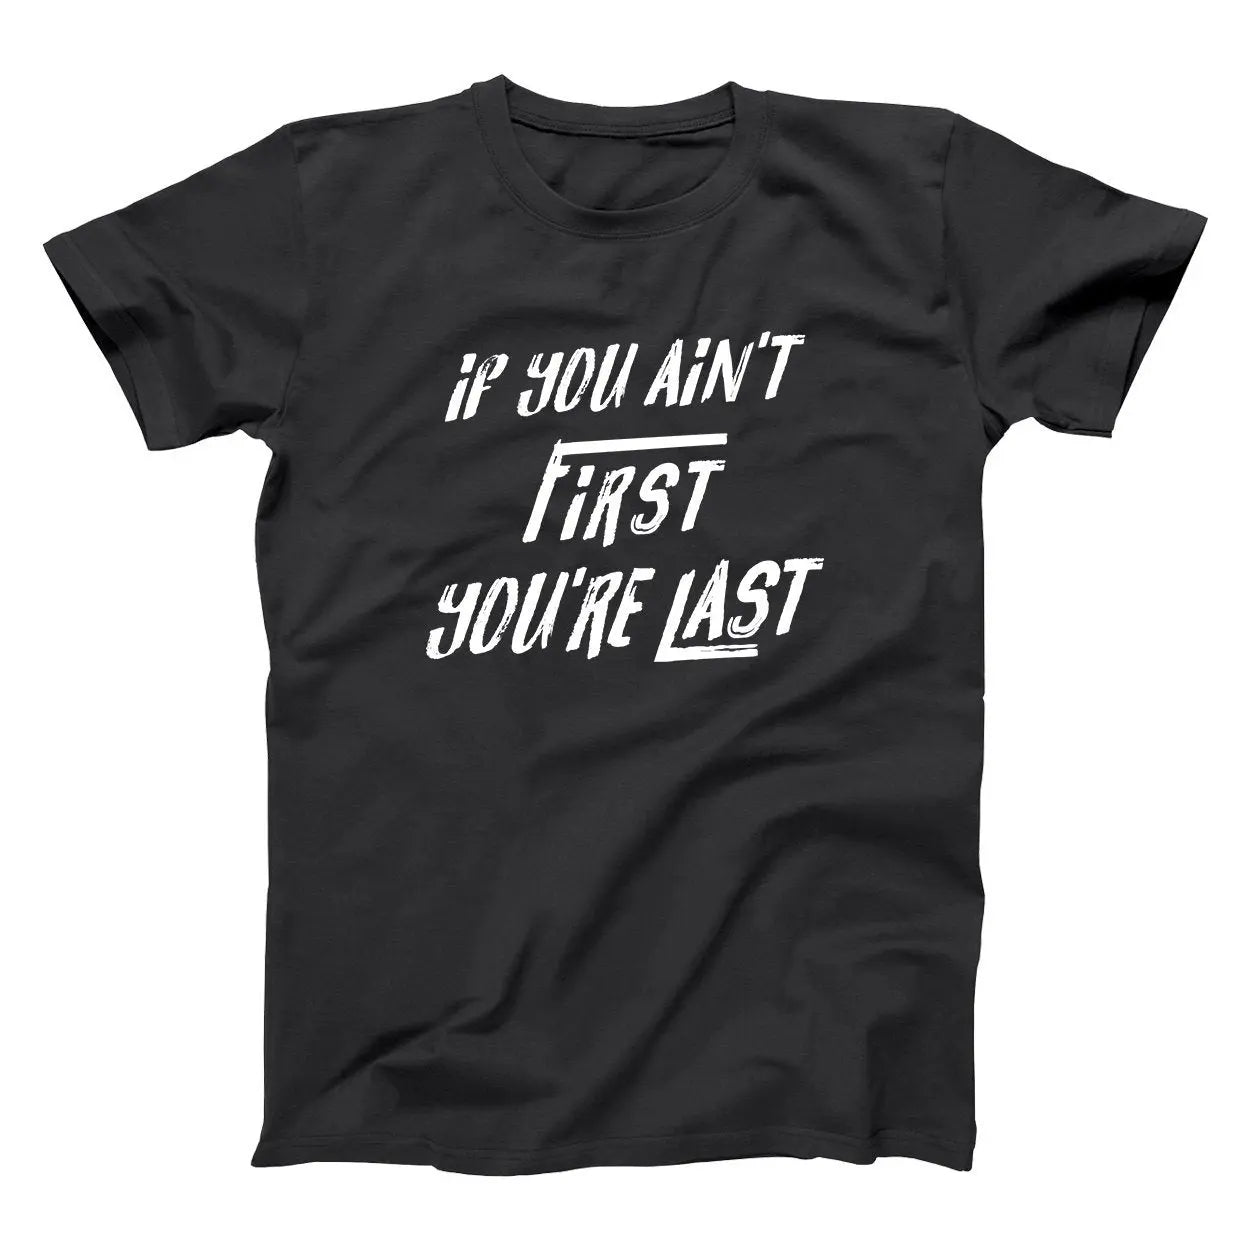 If You Aint First You're Last Tshirt - Donkey Tees